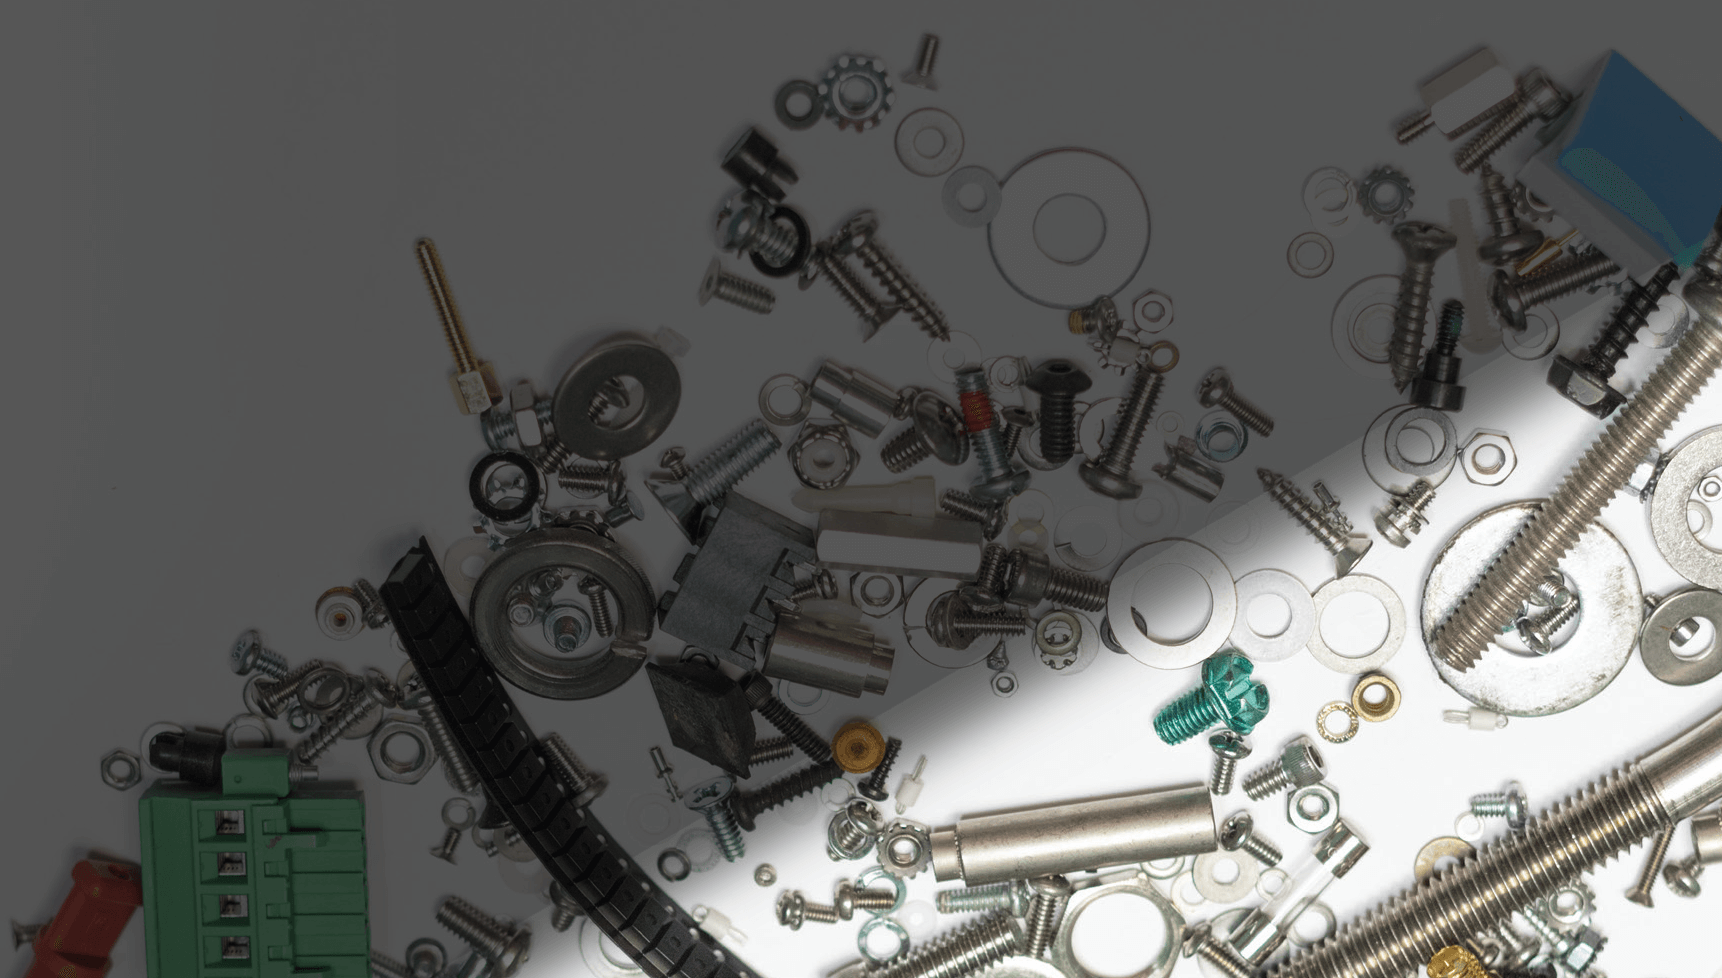 Components For Manufacturing, LLC featured image.